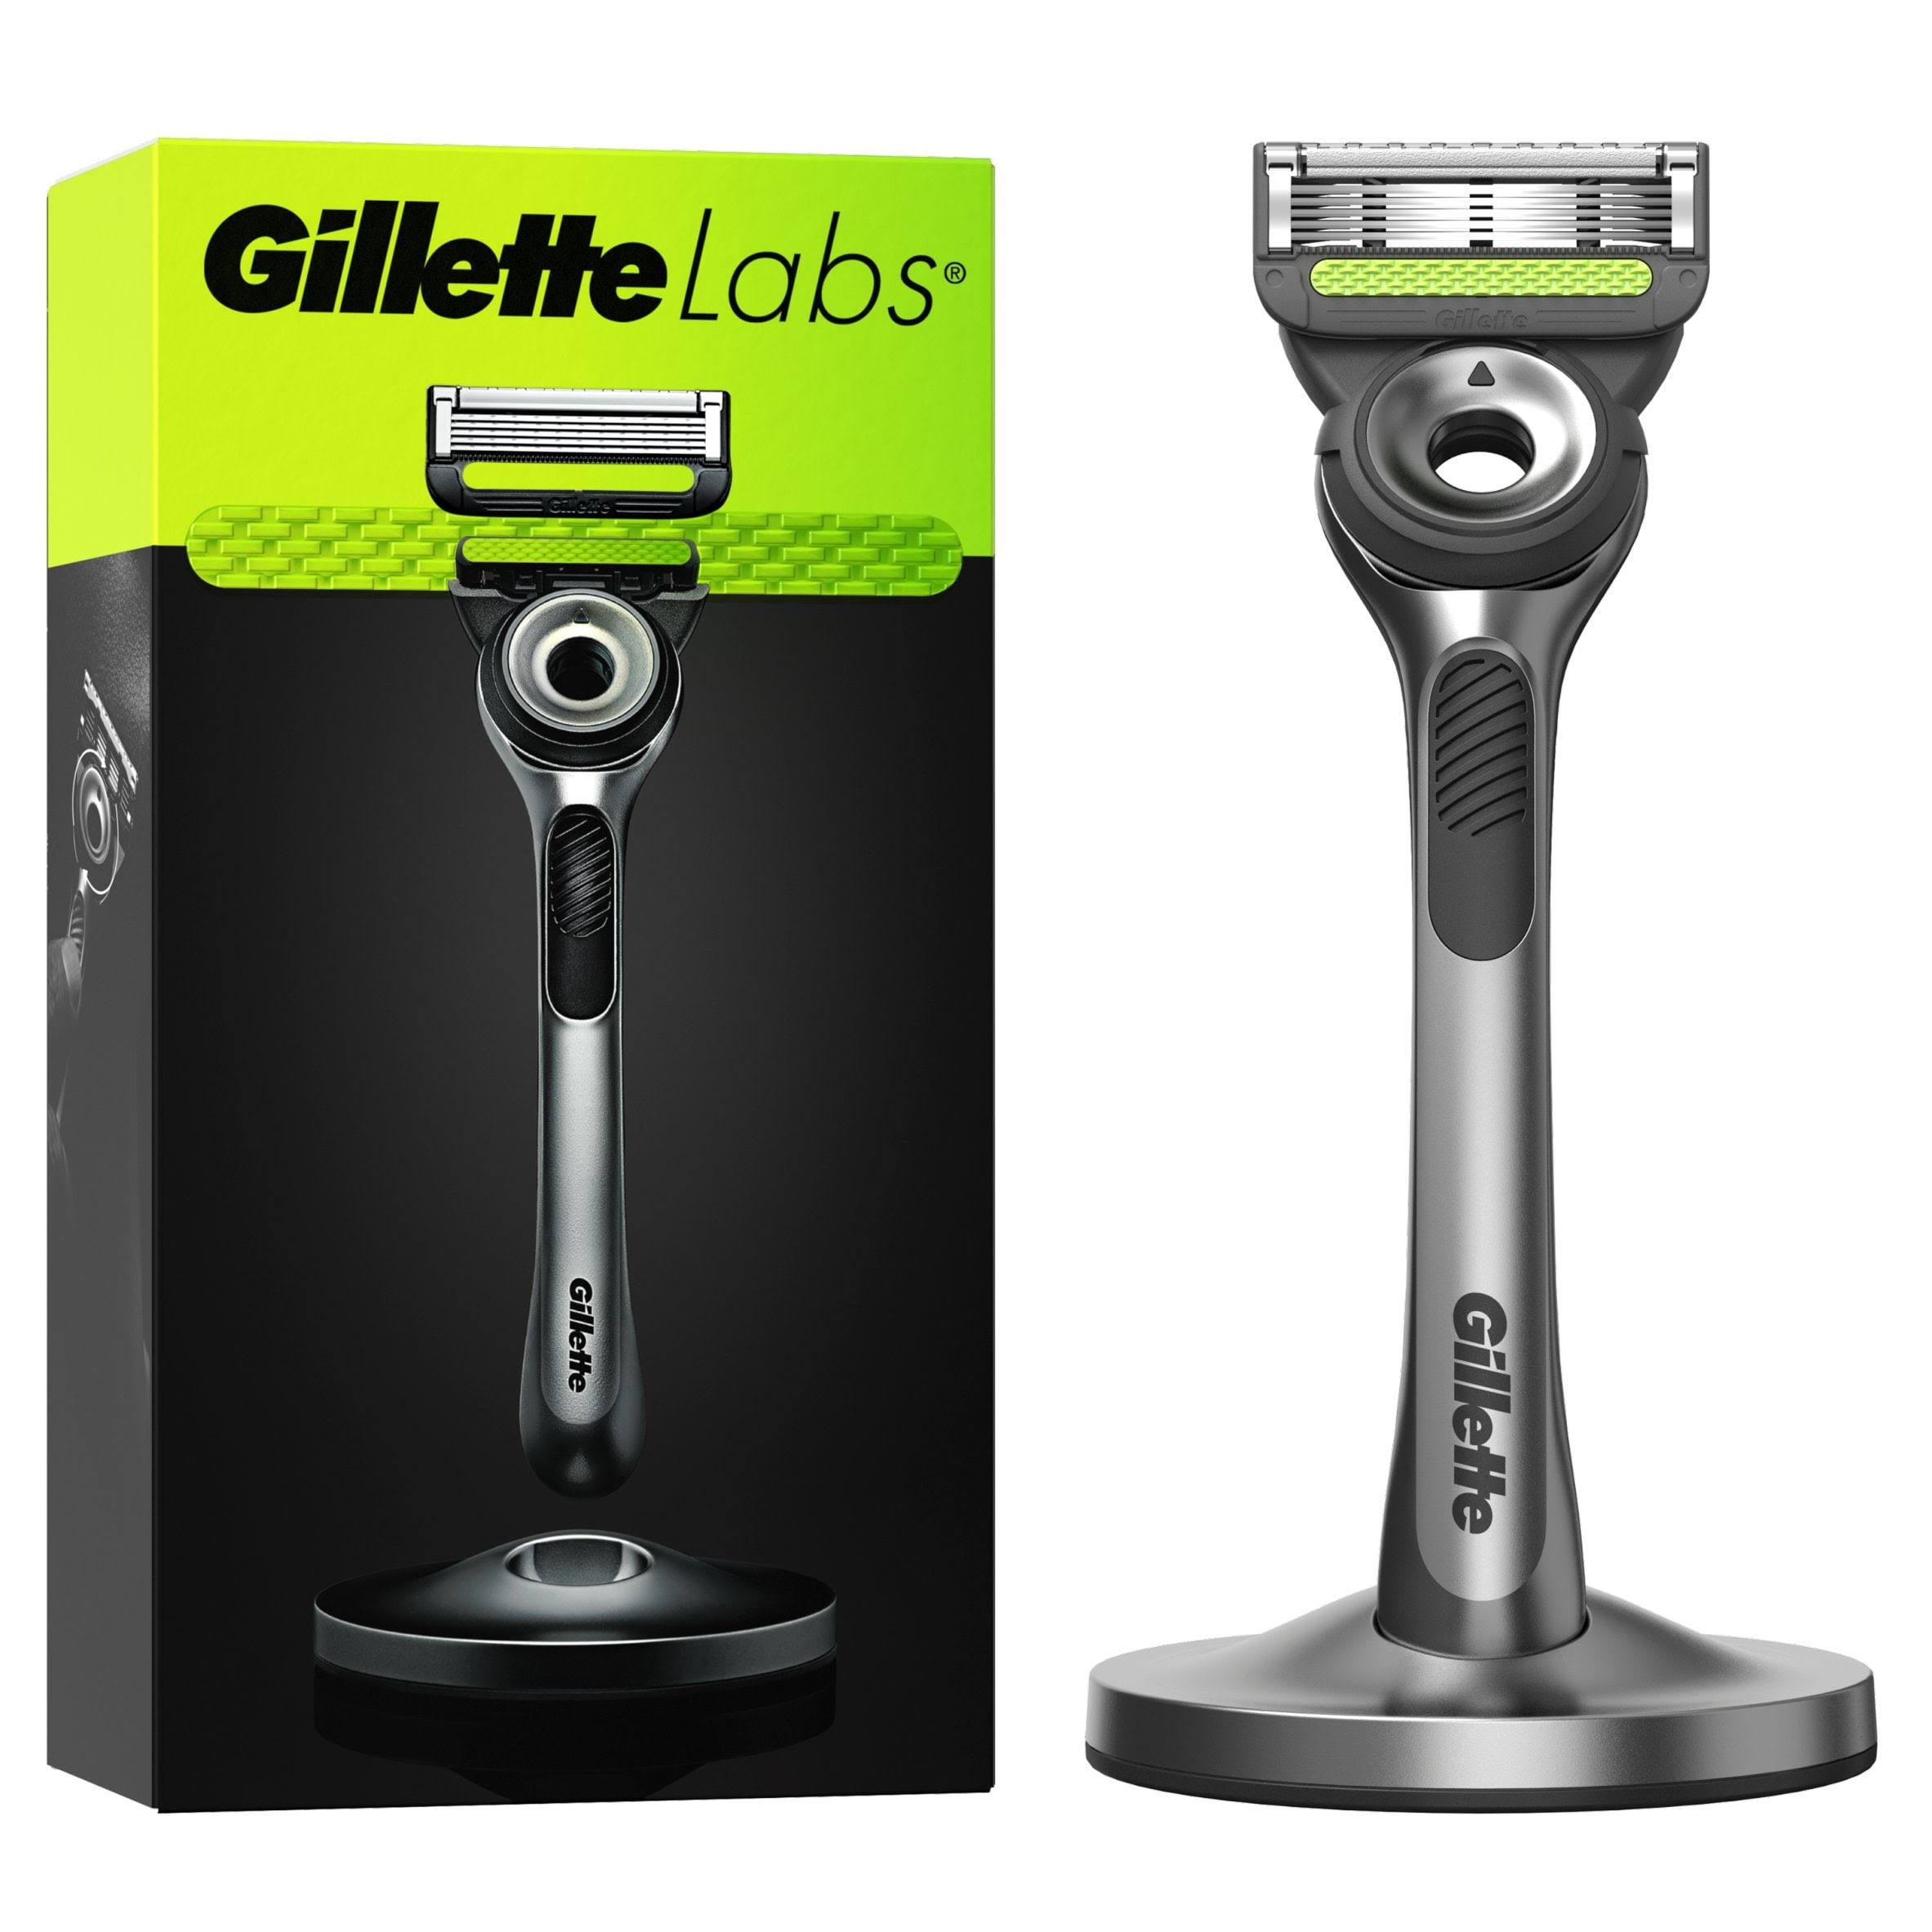 Gillette Labs Razor With Exfoliating Bar & Magnetic Stand